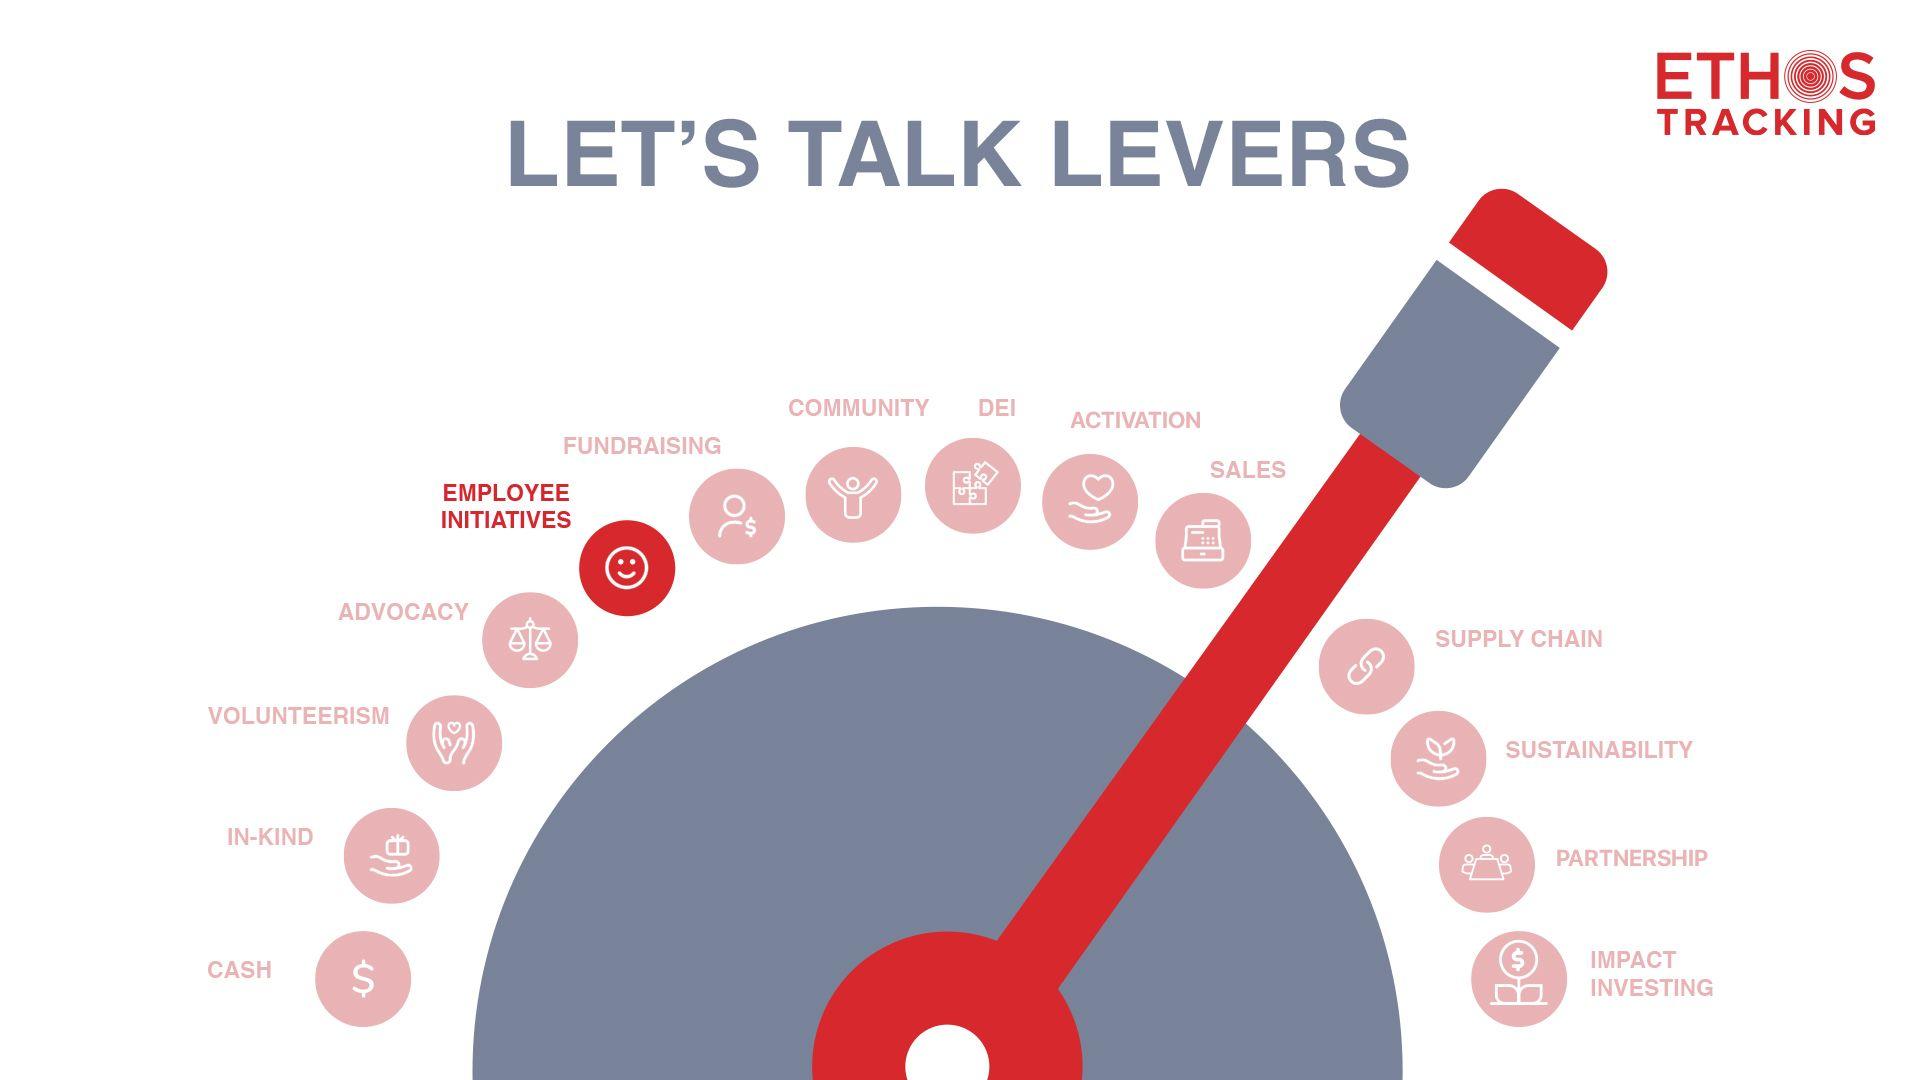 Let's Talk Levers: Employee Initiatives